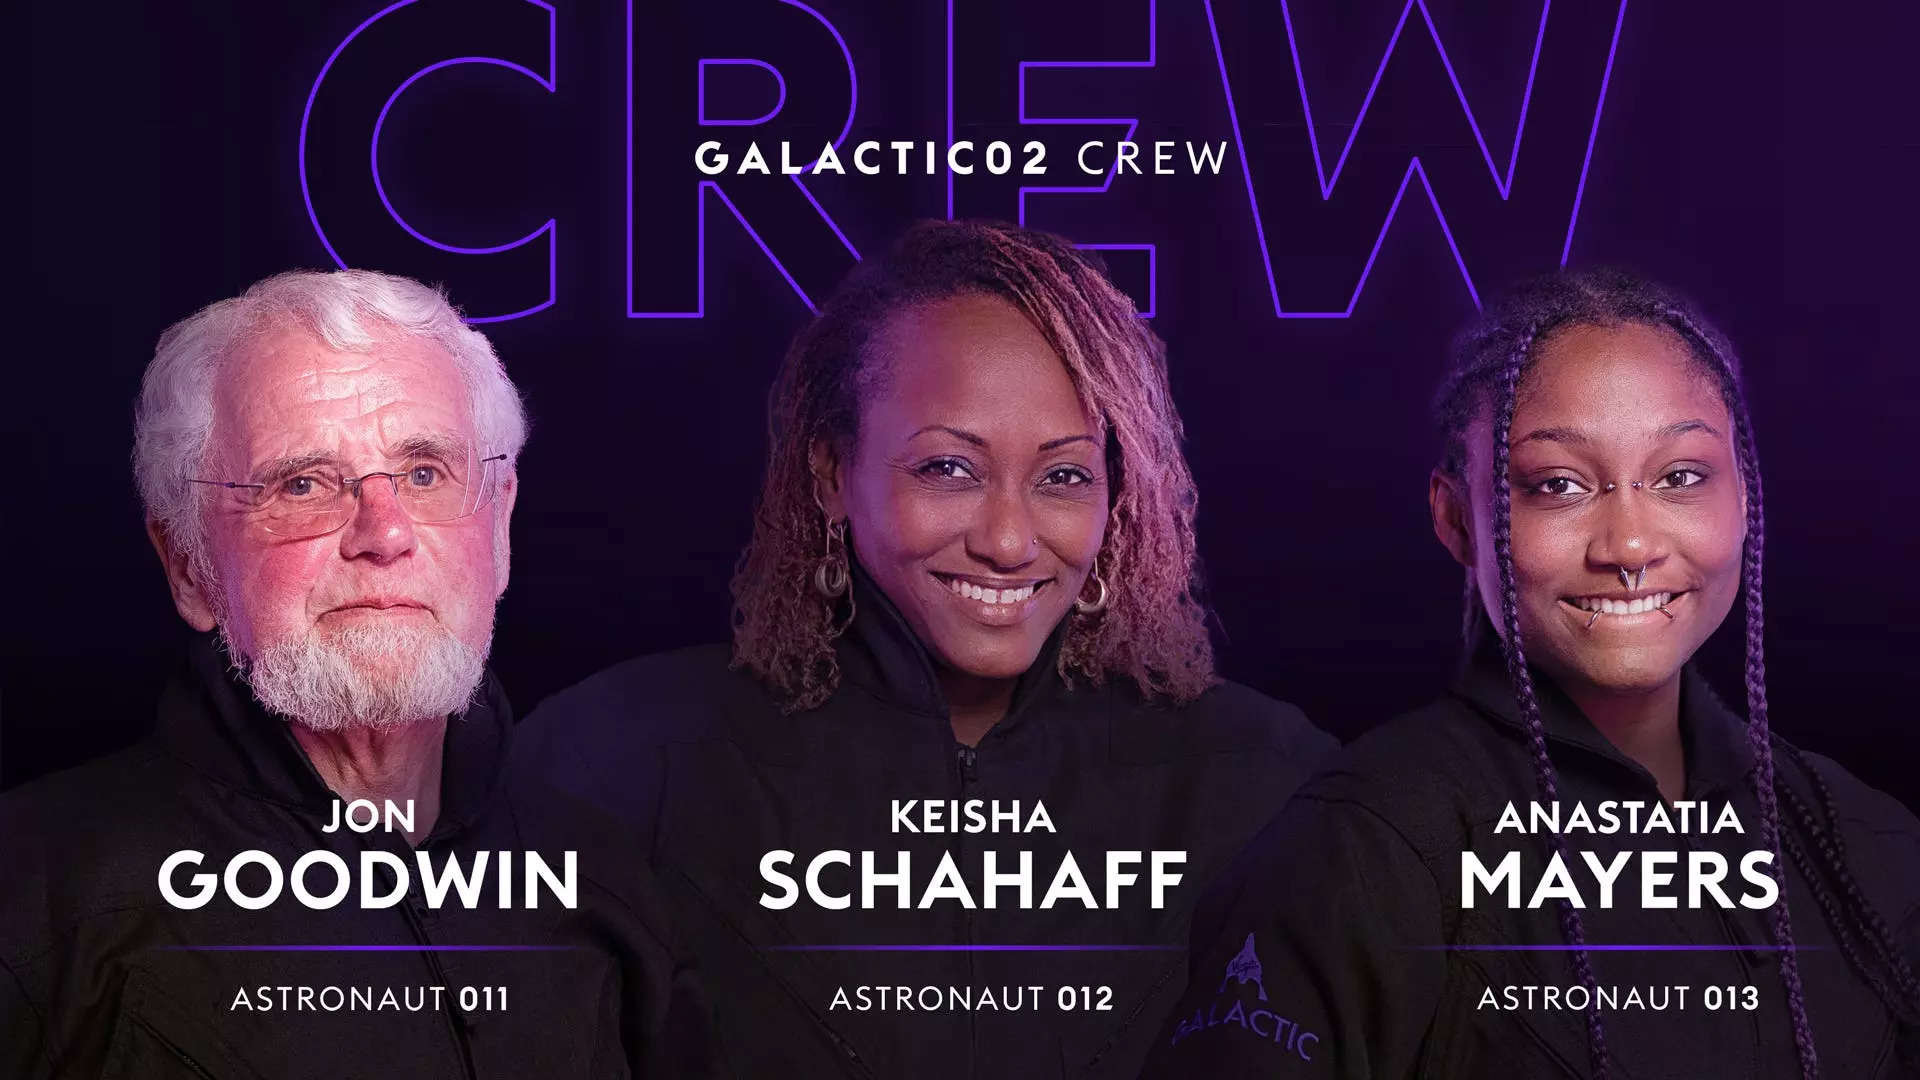 A photo montage shows the crew for the Galactic 02 Virgin Galactic spaceflight.